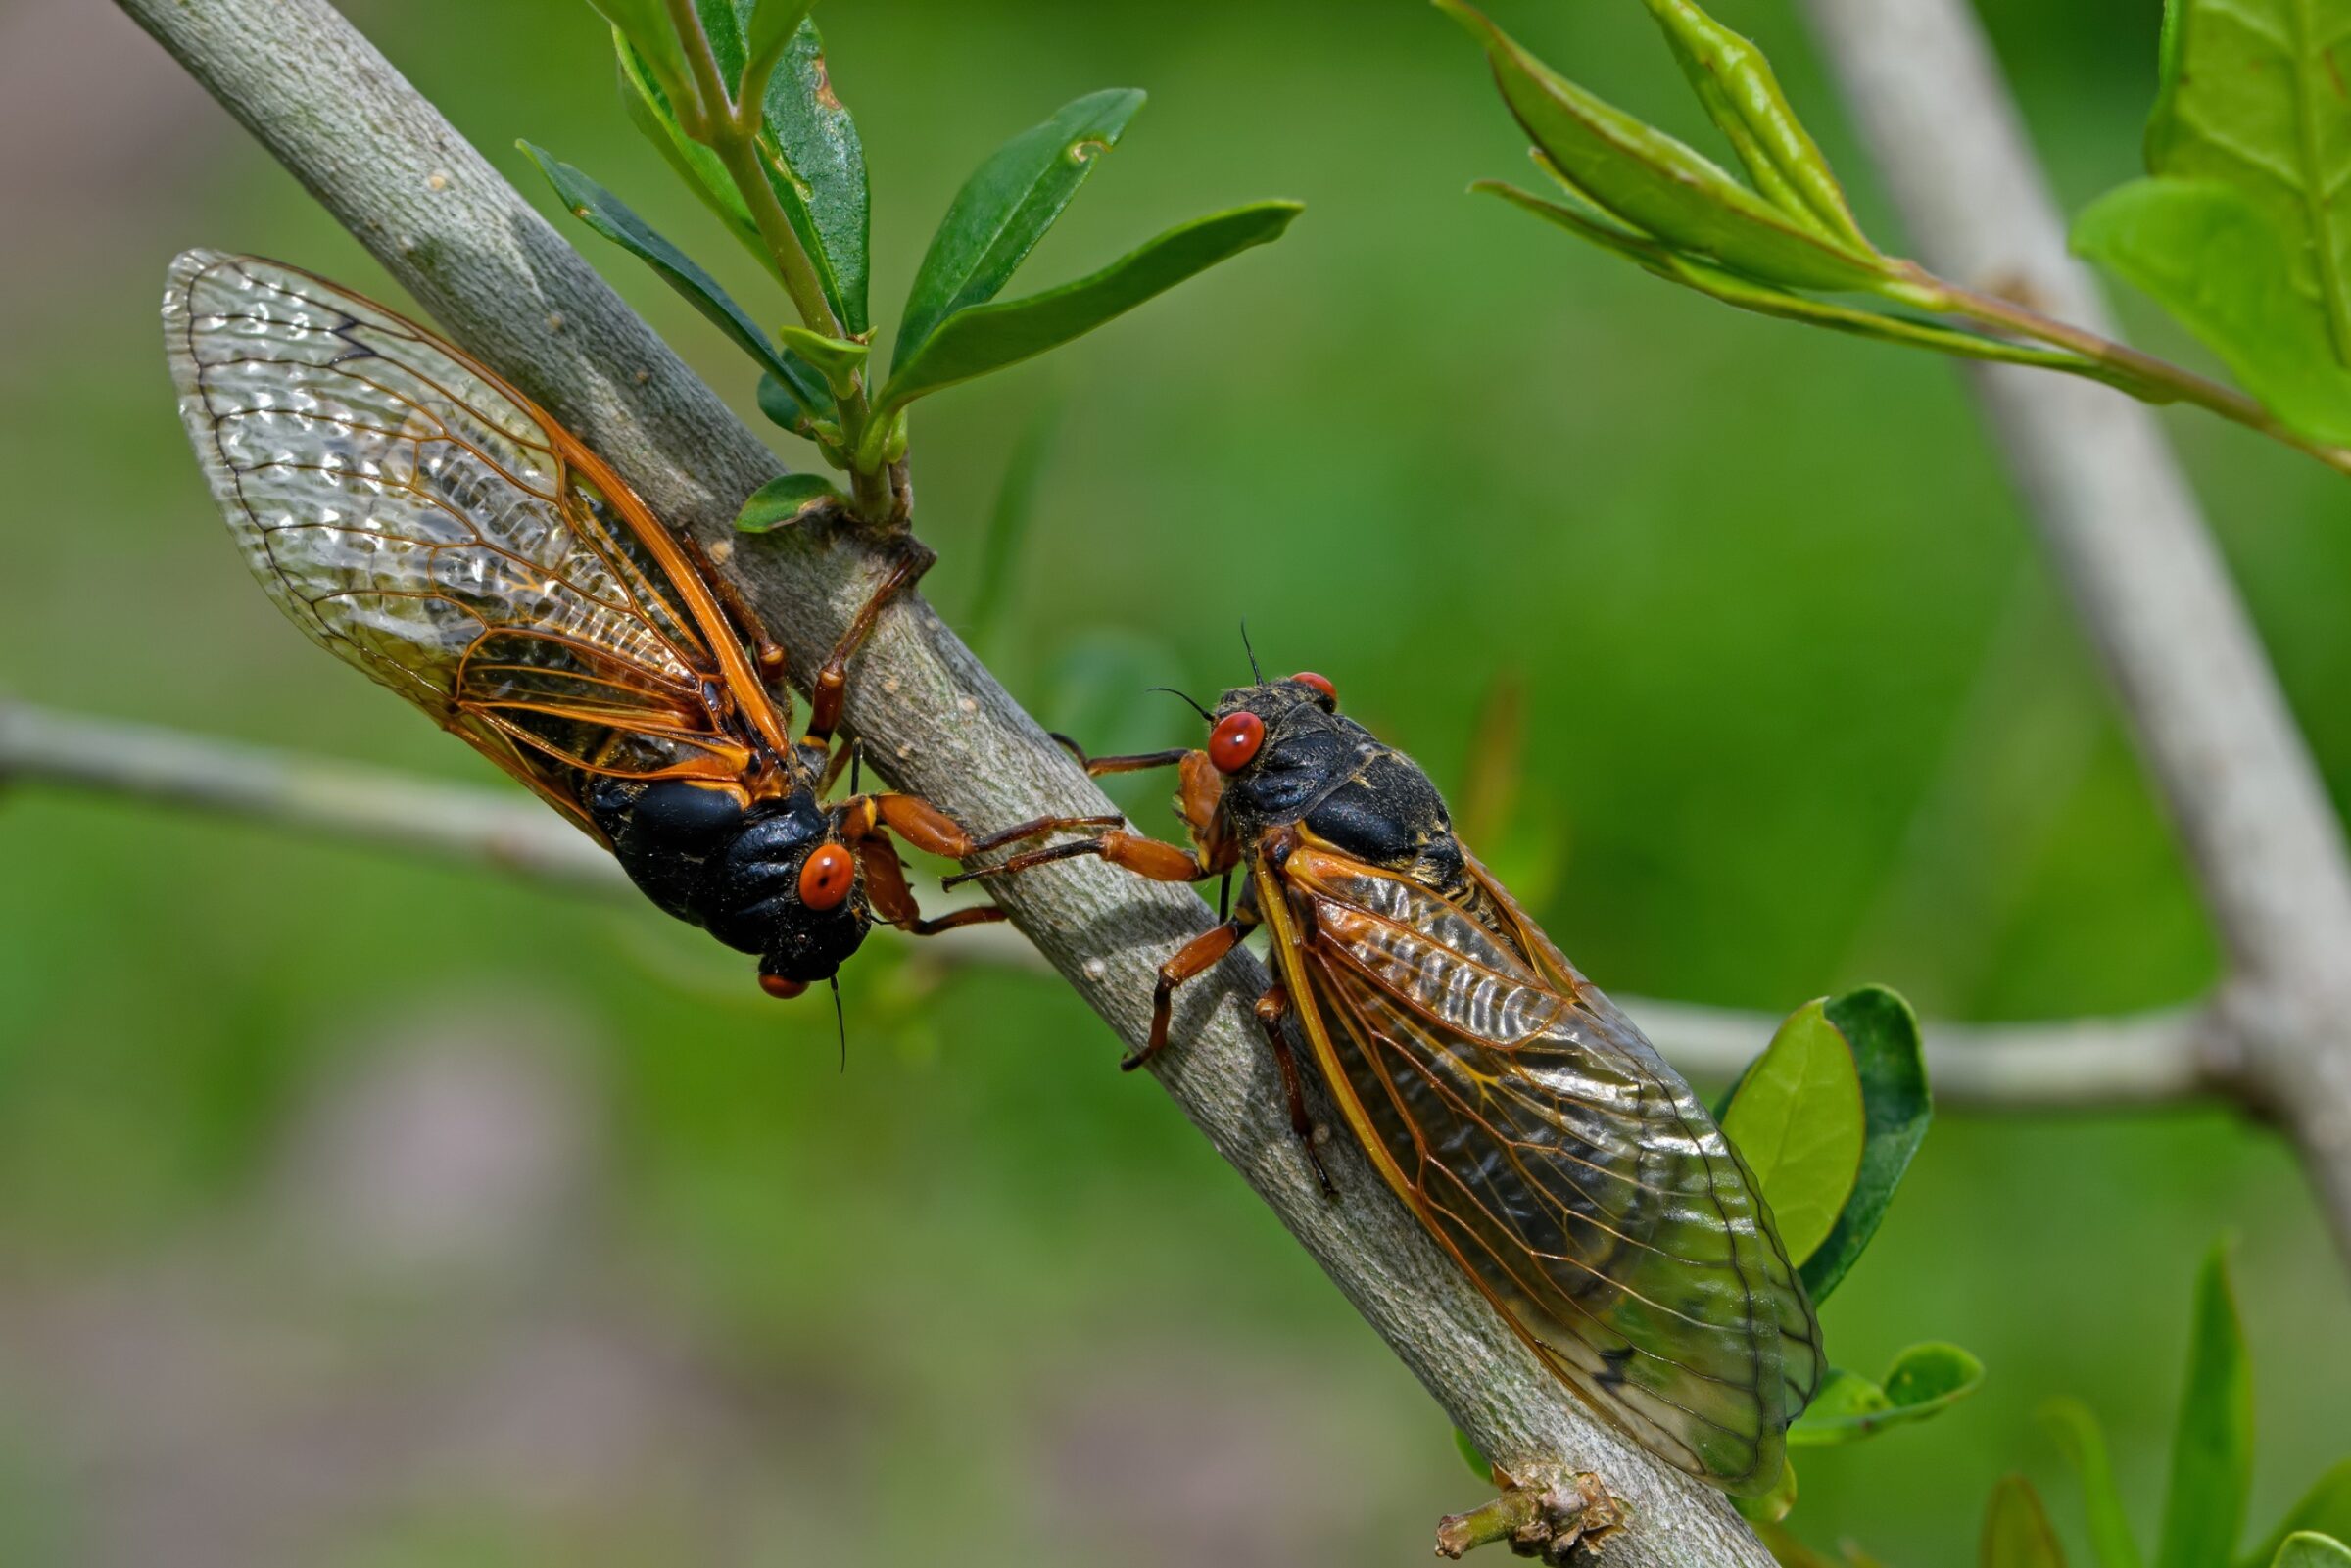 a photo of two periodical cicadas perched next to each other on a branch